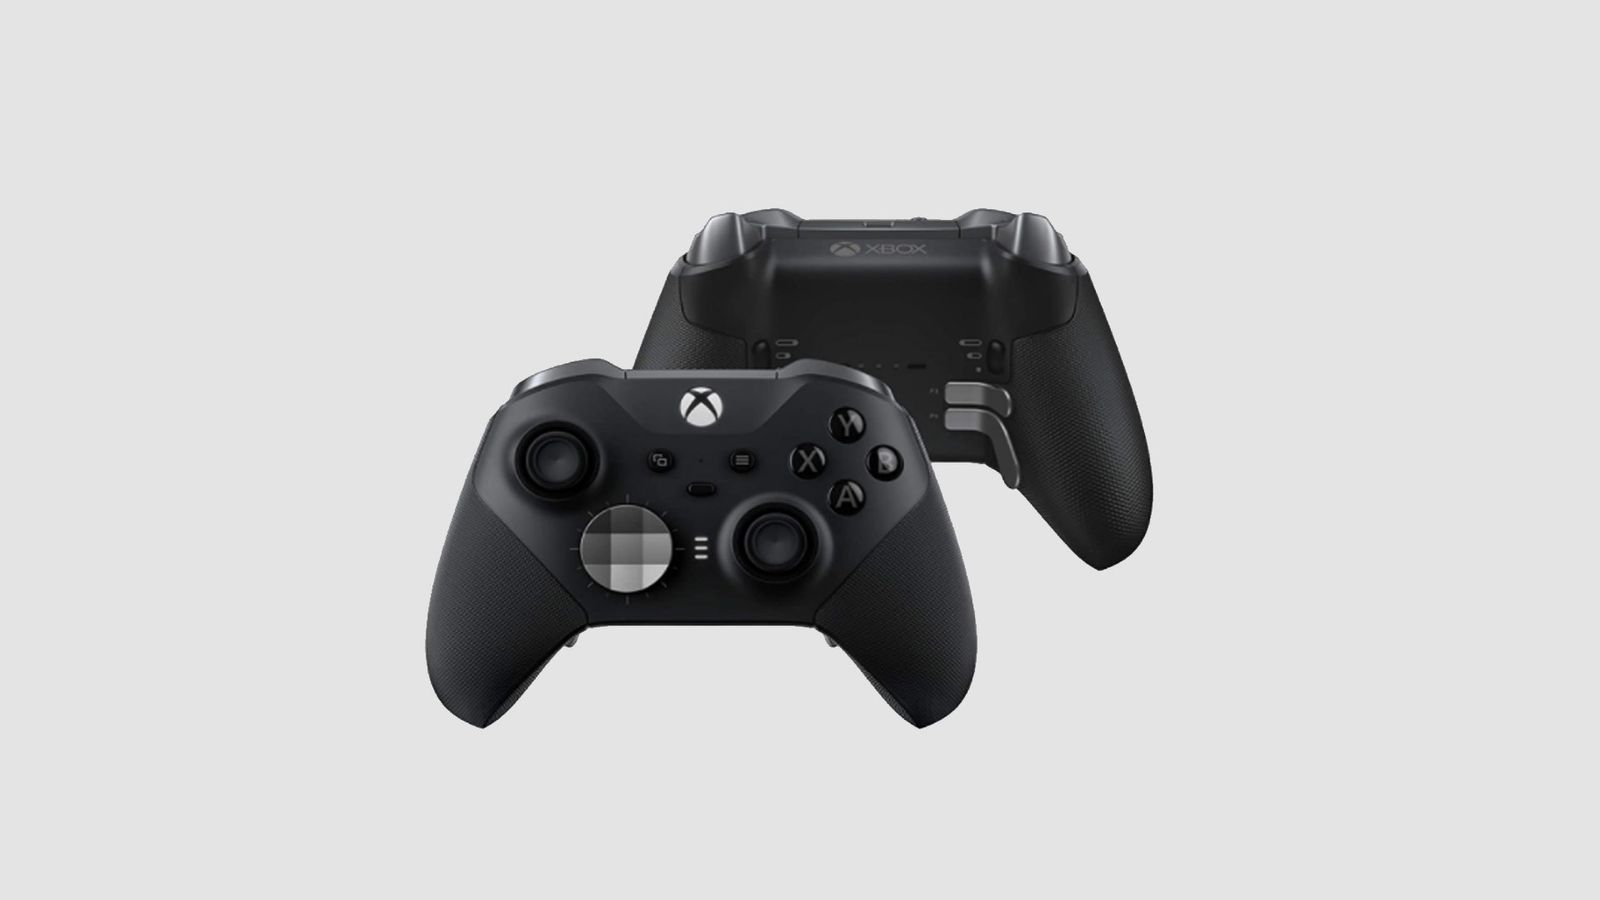 Best controller for Halo Infinite Microsoft product image of a black, elite Xbox controller.